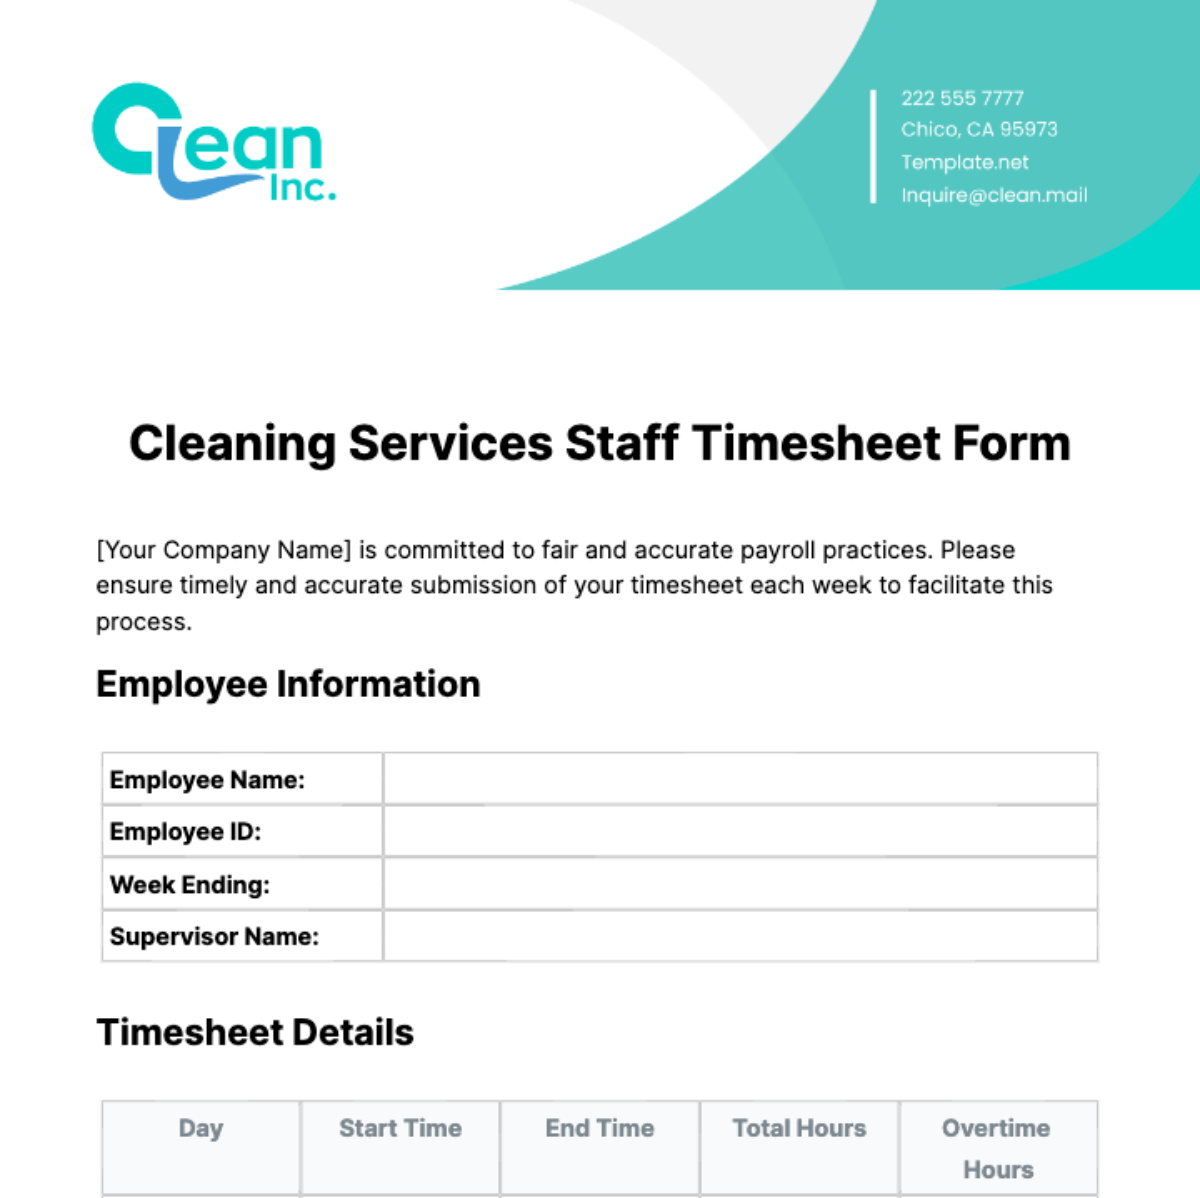 Cleaning Services Staff Timesheet Form Template